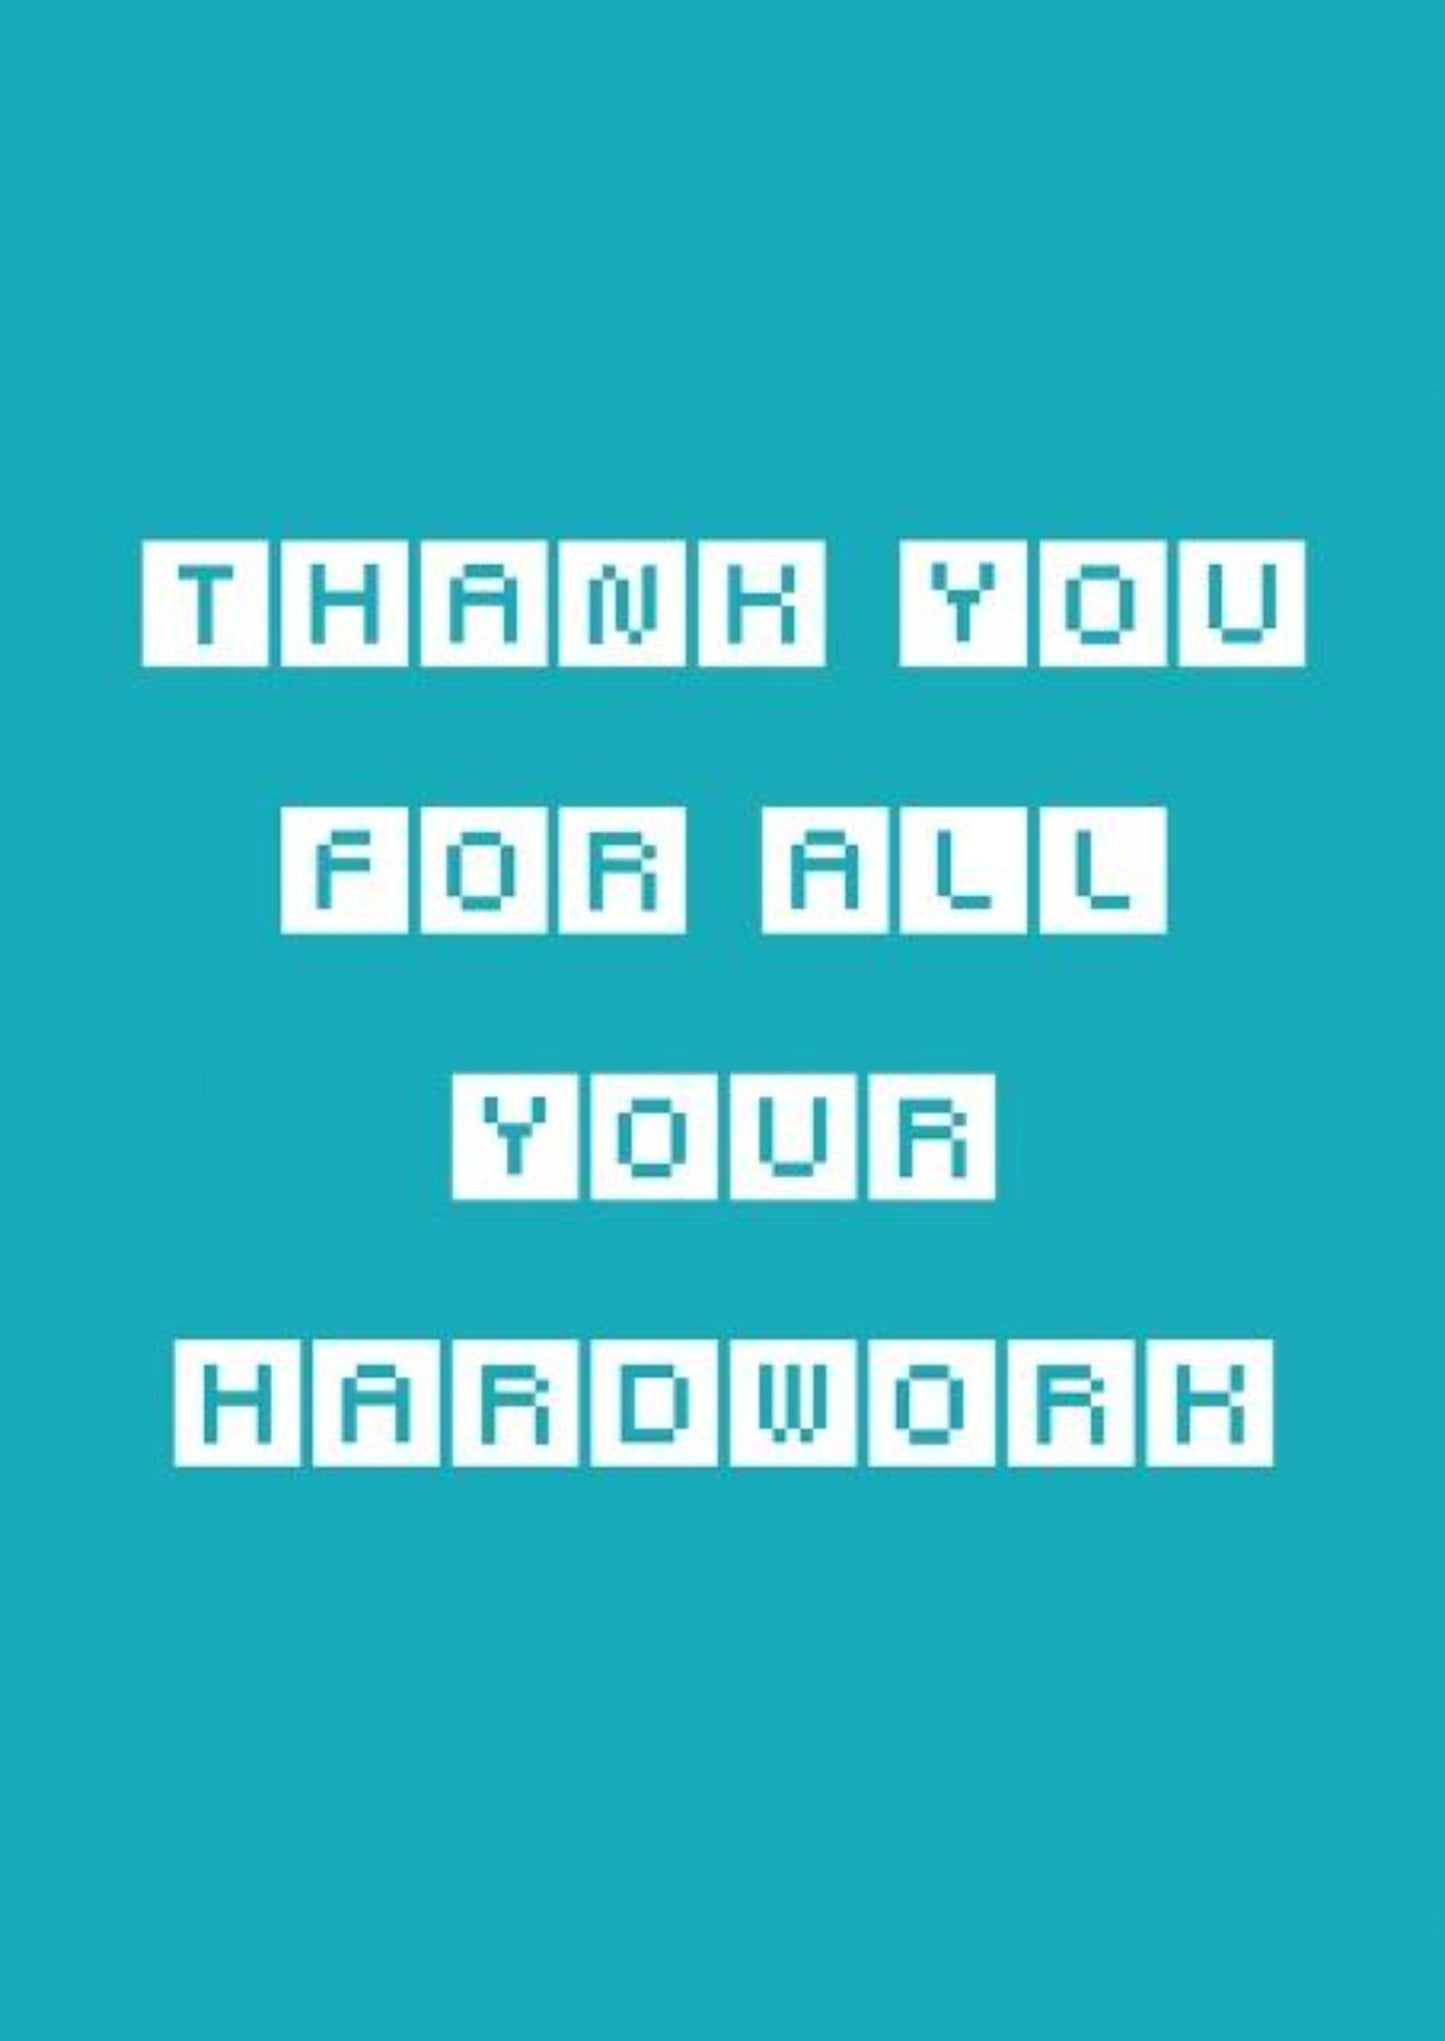 Thank You For All Your Hard Work - Thank You Greeting Card.